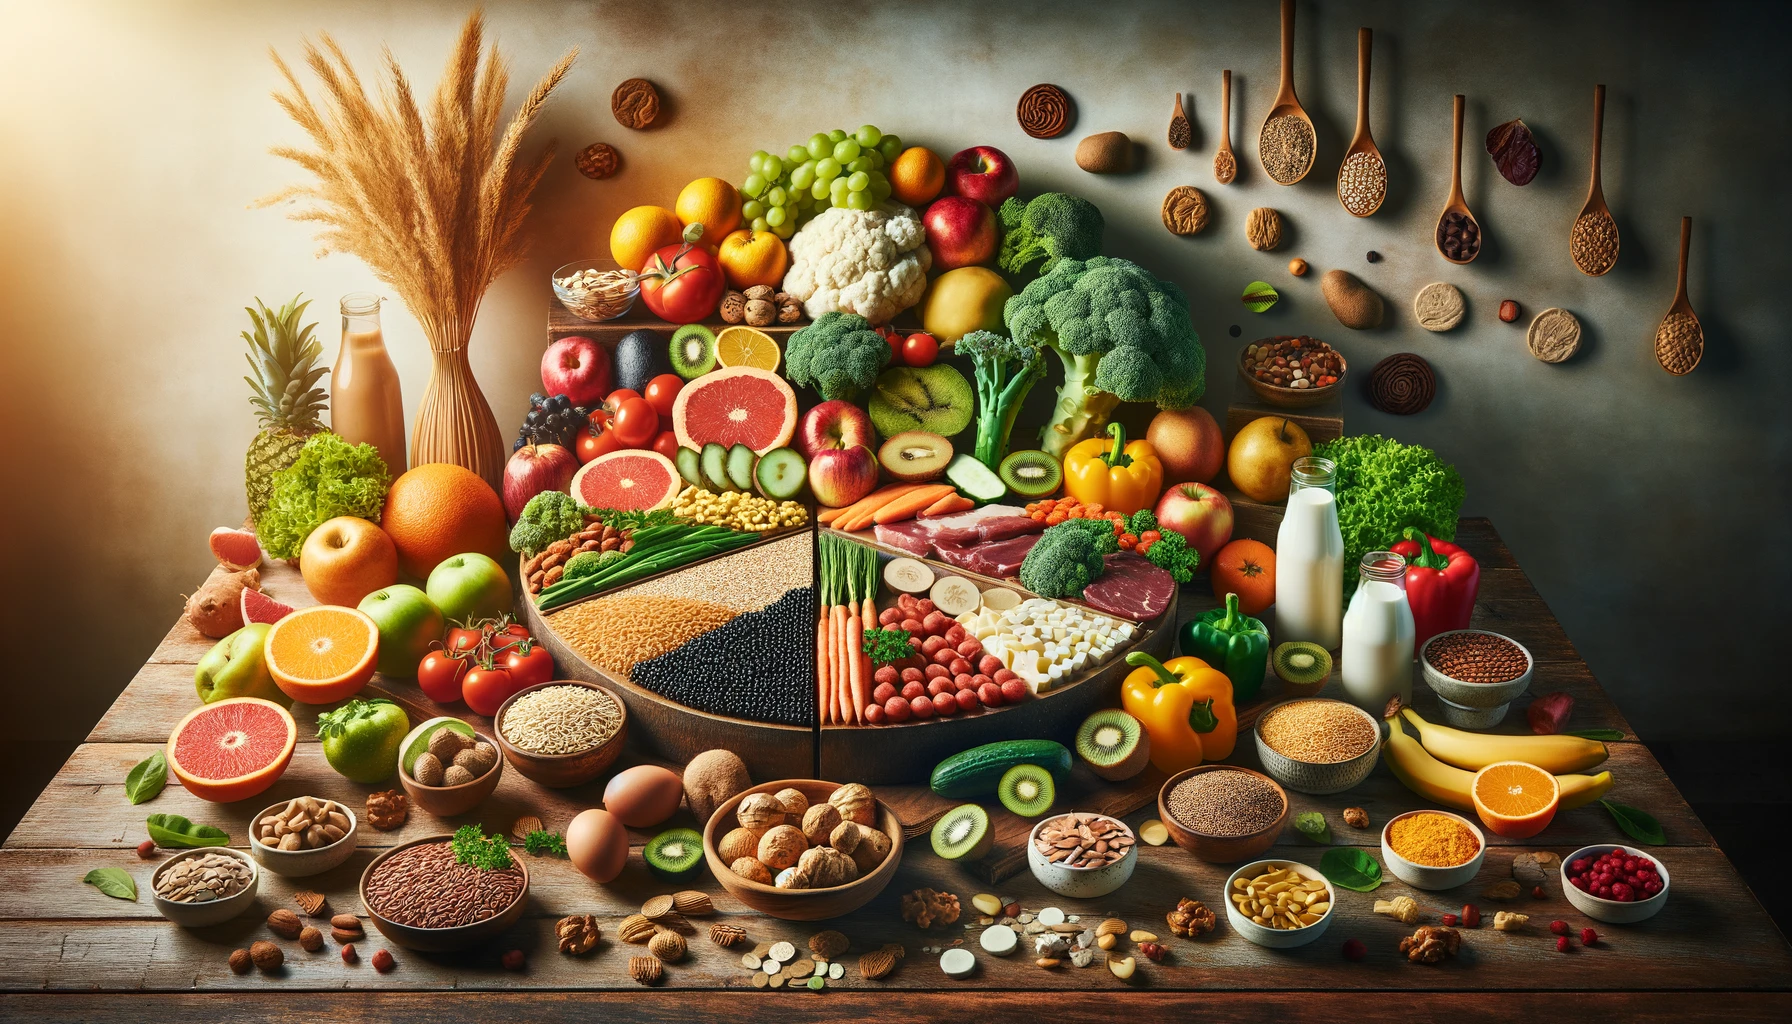 A variety of nutritious foods representing a balanced diet, featured on the Healthy Life - New Start blog.